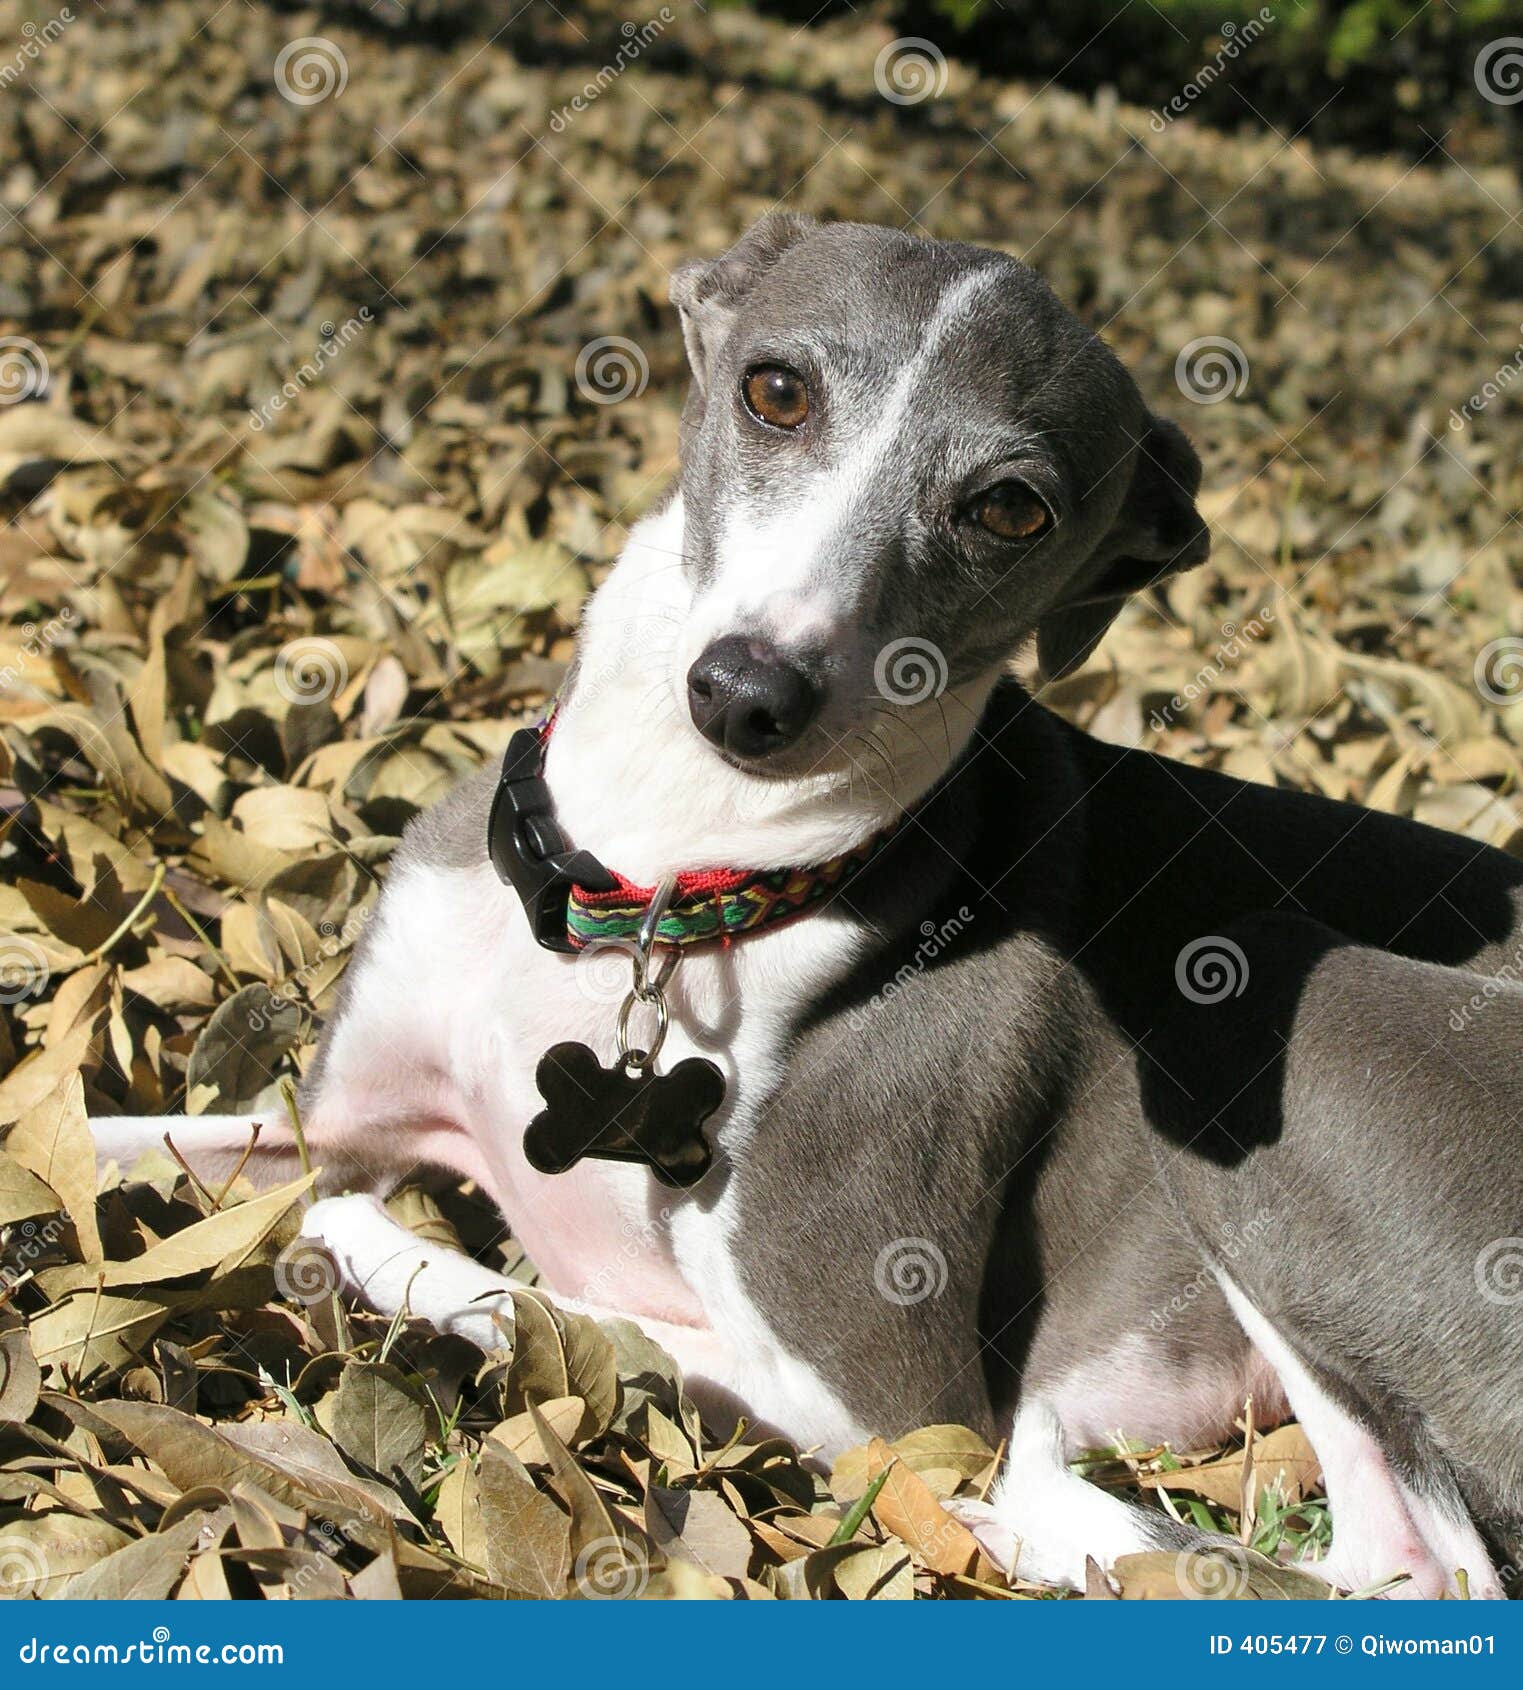 greyhound in fall leaves